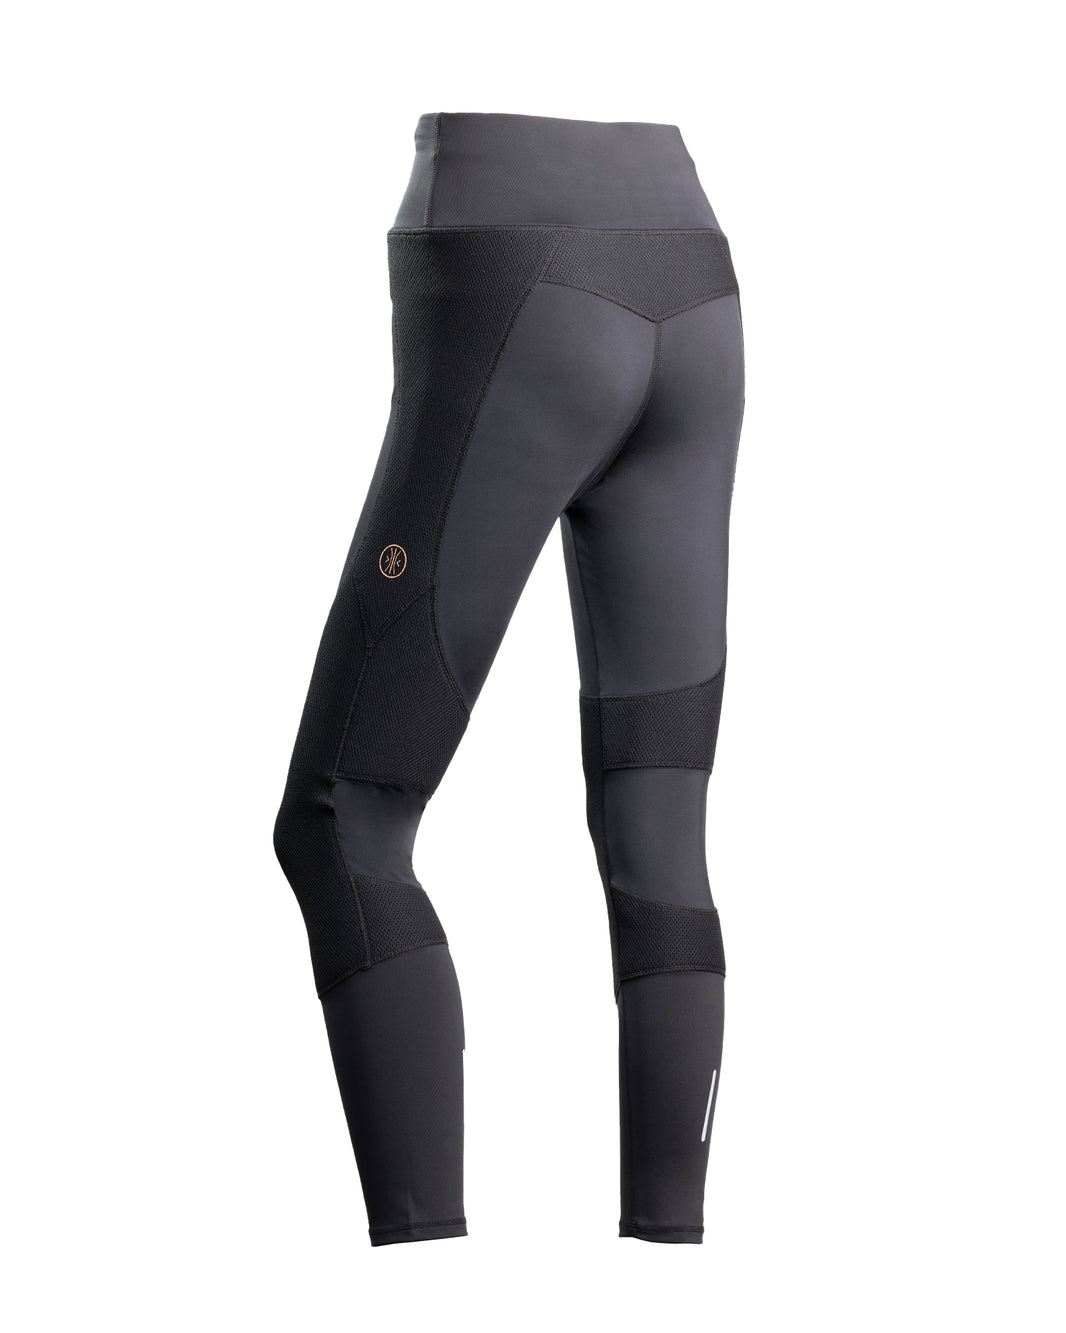 Imbrace Knee Support Compression Leggings